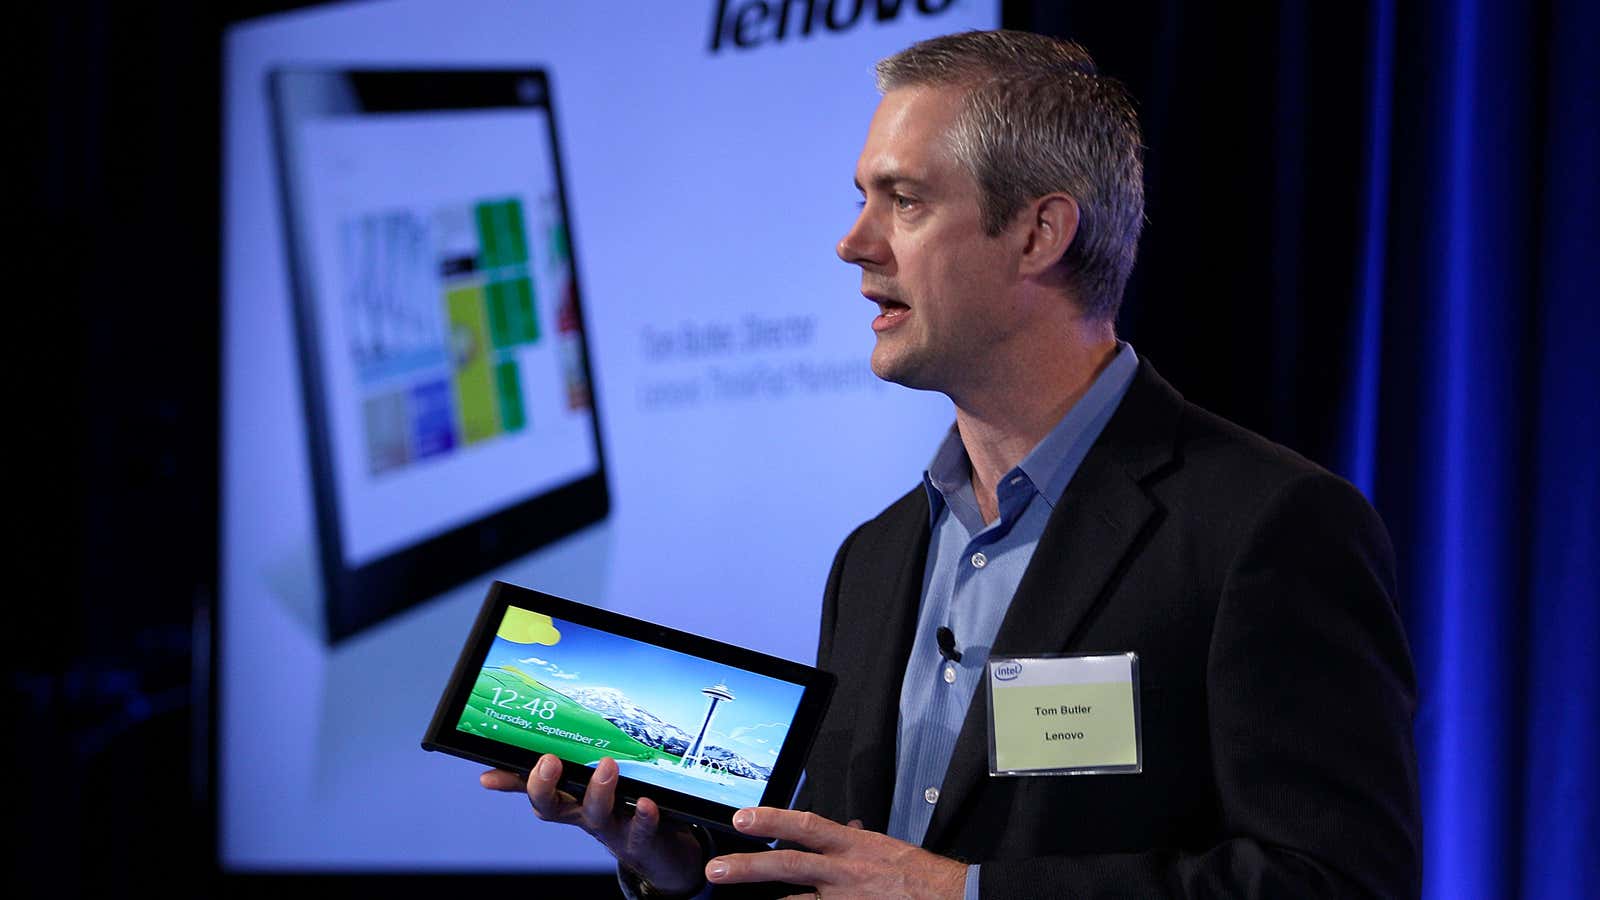 Lenovo makes tablets based on Intel’s Atom chips and Windows 8. Can Intel remain a player in that market?